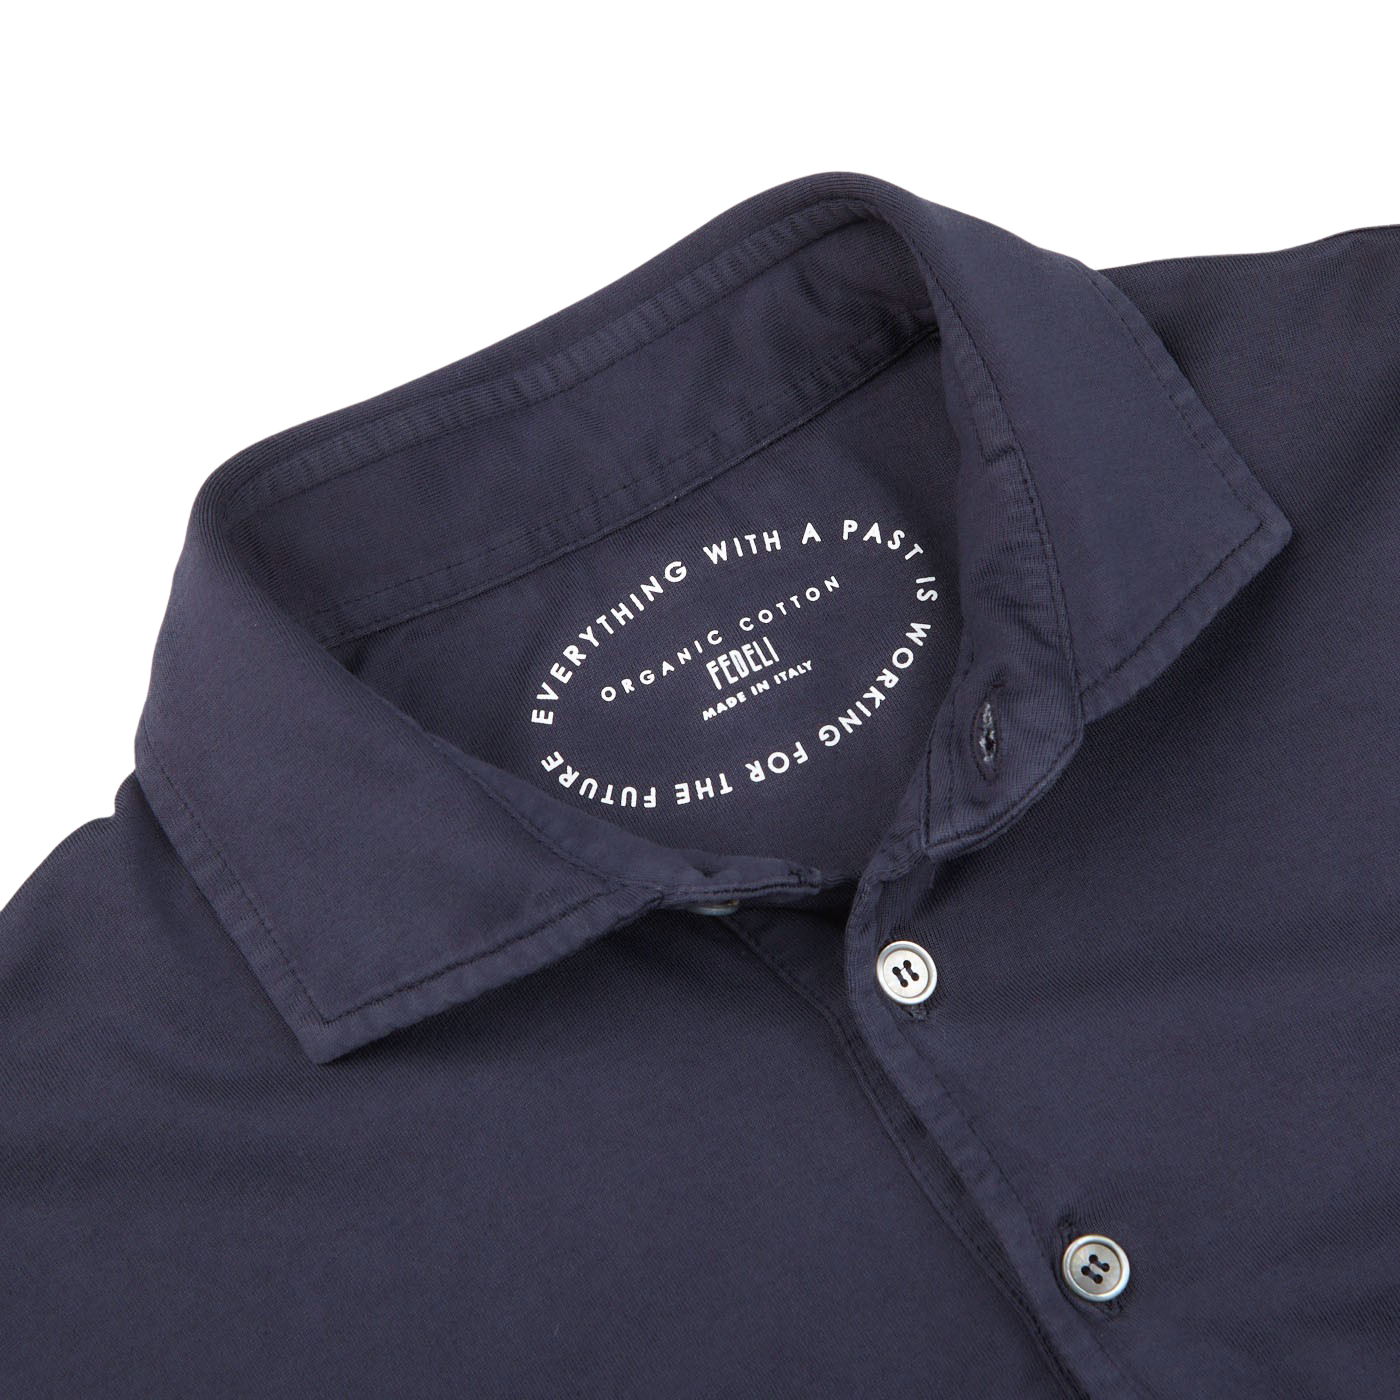 The collar of a Navy Blue Organic Cotton LS Polo Shirt by Fedeli.